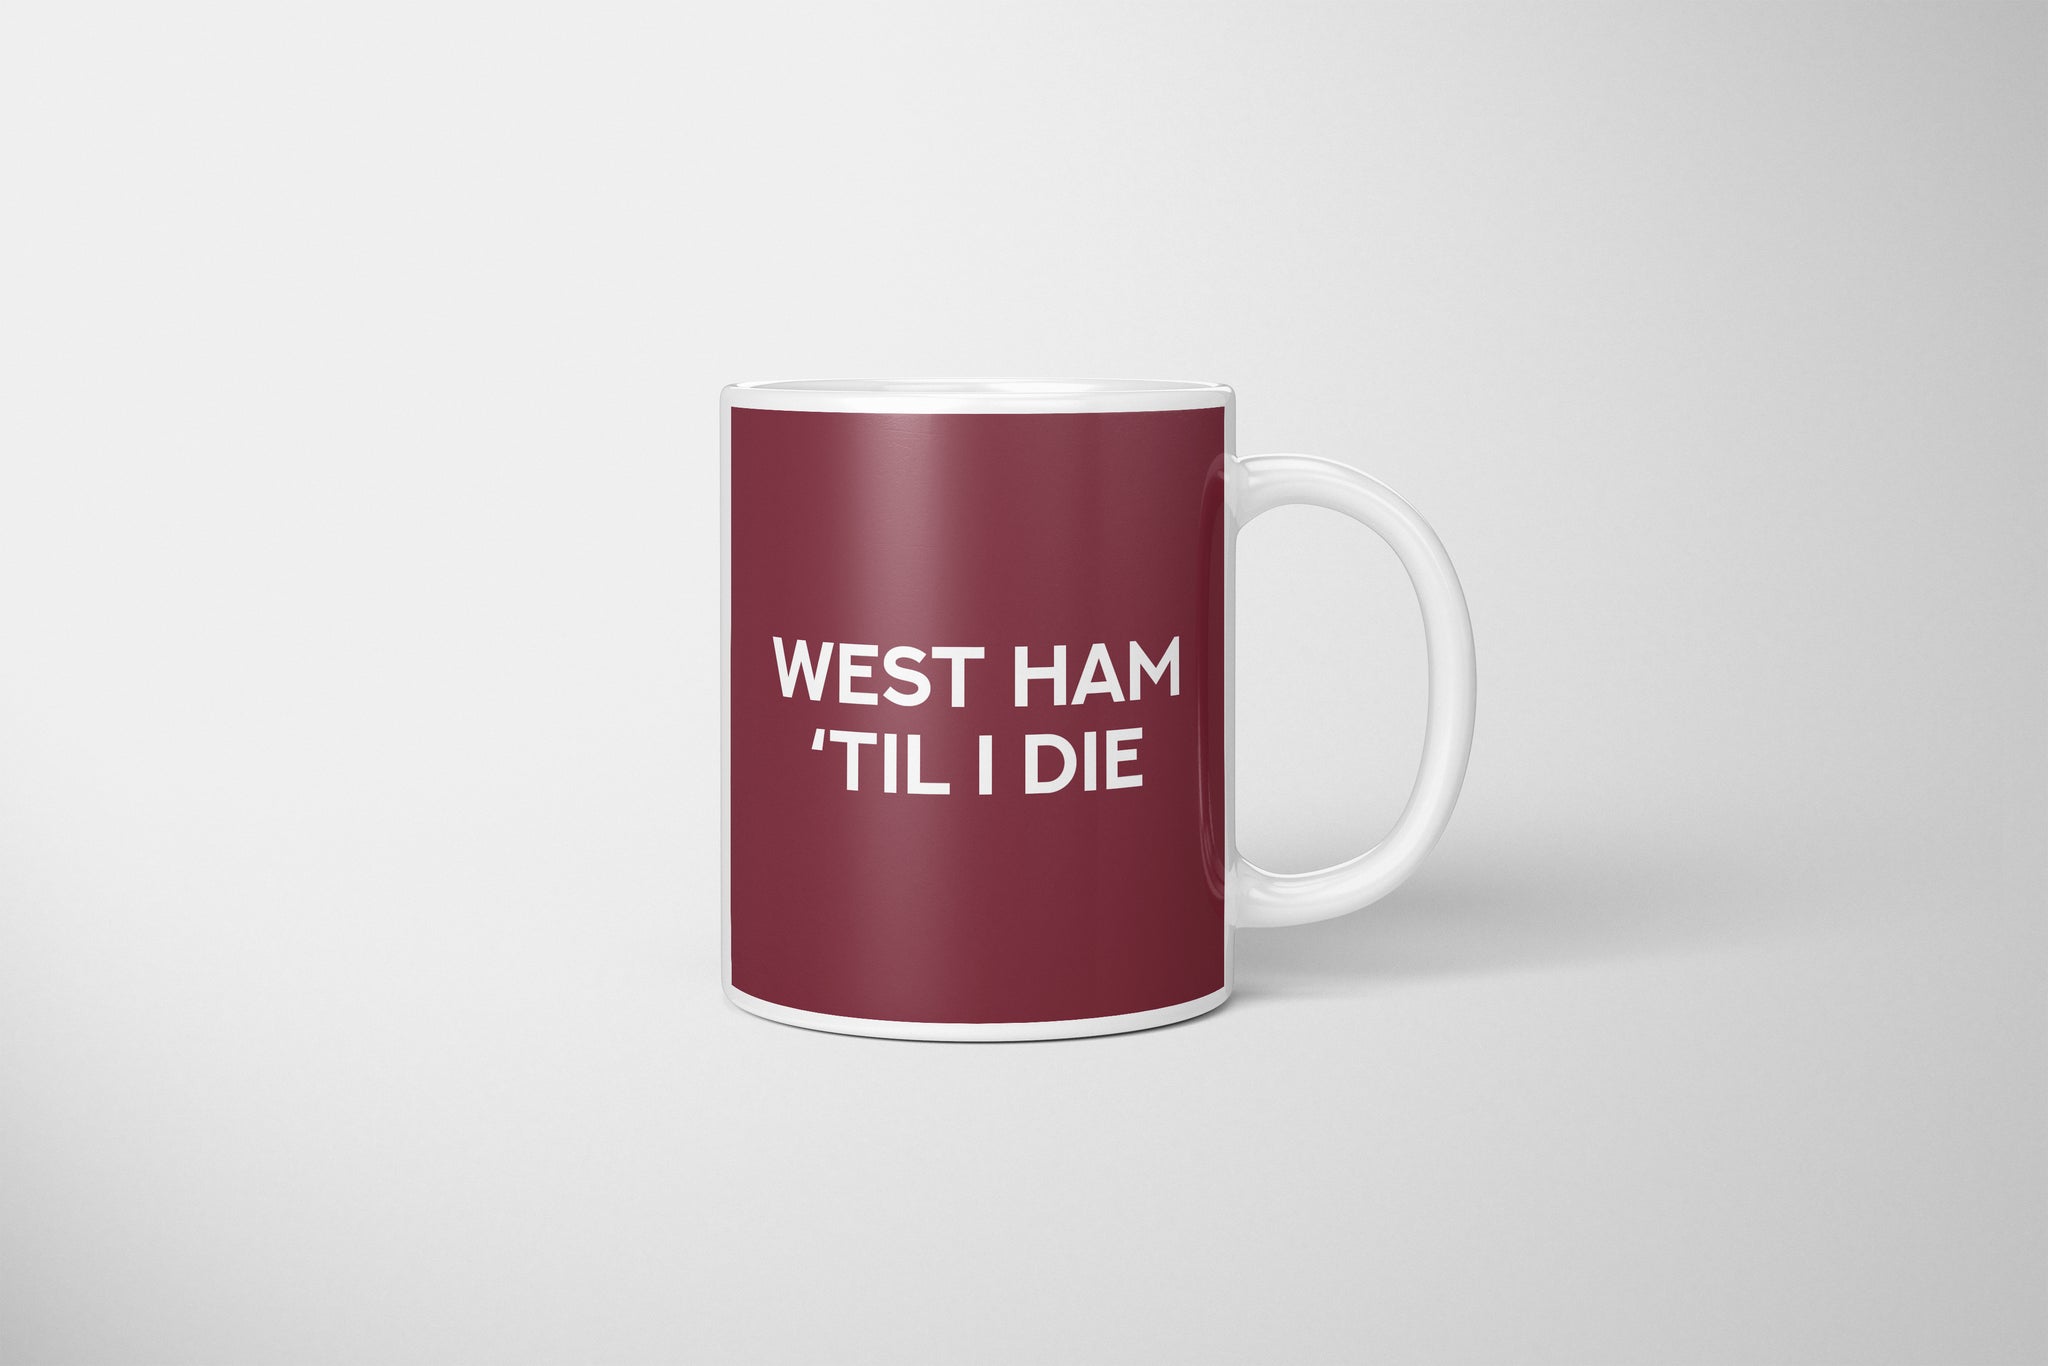 West Ham Fan Mug, West Ham Fan Mug, West Ham FC Mug, West Ham Football Fan Gift, West Ham Swear Mug, Gift For West Ham Fan, The Hammers Mug, Perfect Mug For West Ham Fan, West Ham Present, West Ham Football Fan Present